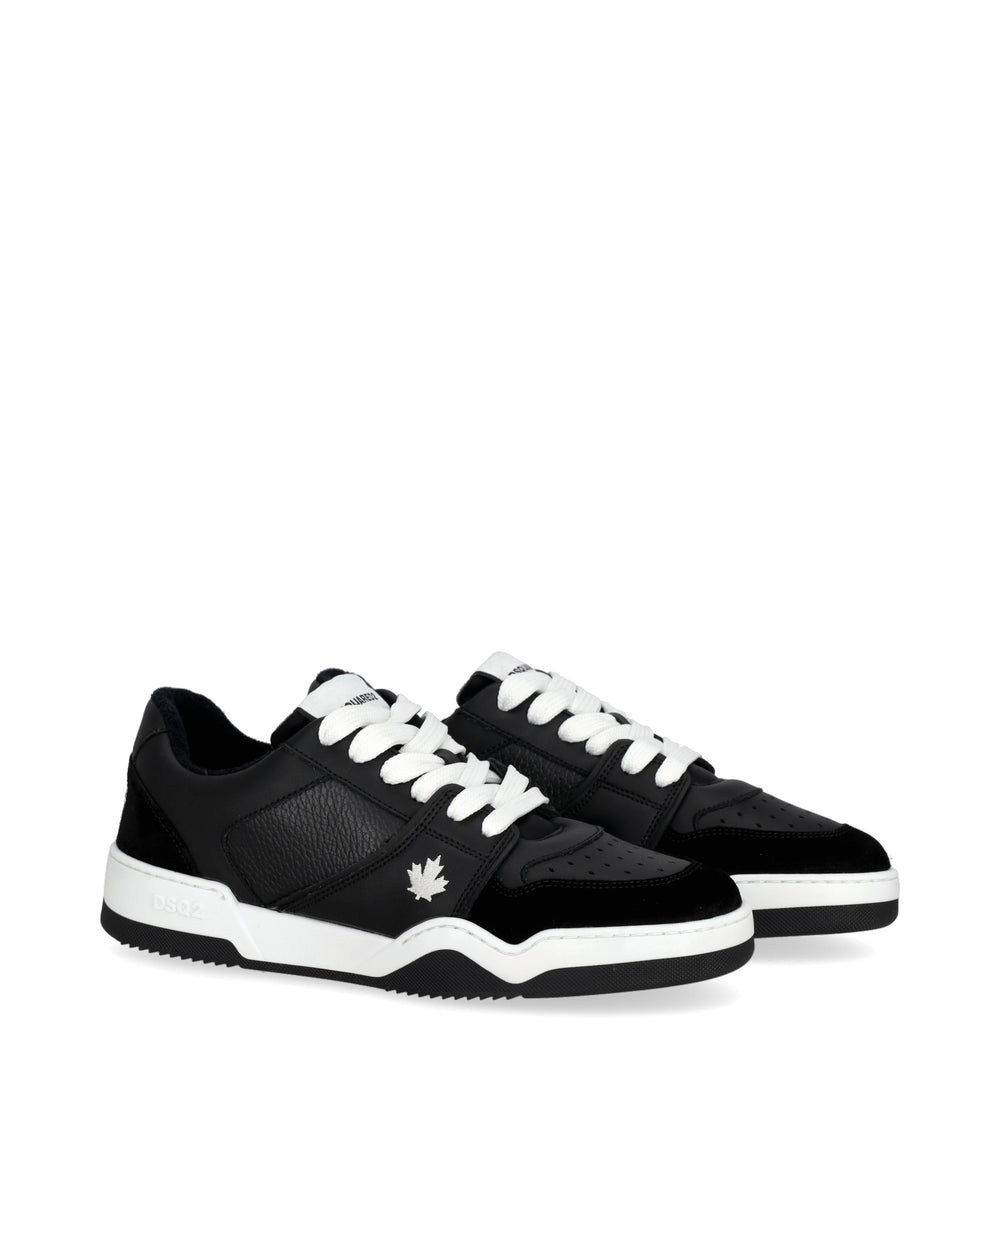 DSQUARED2 | SNEAKERS | SNM031501606243